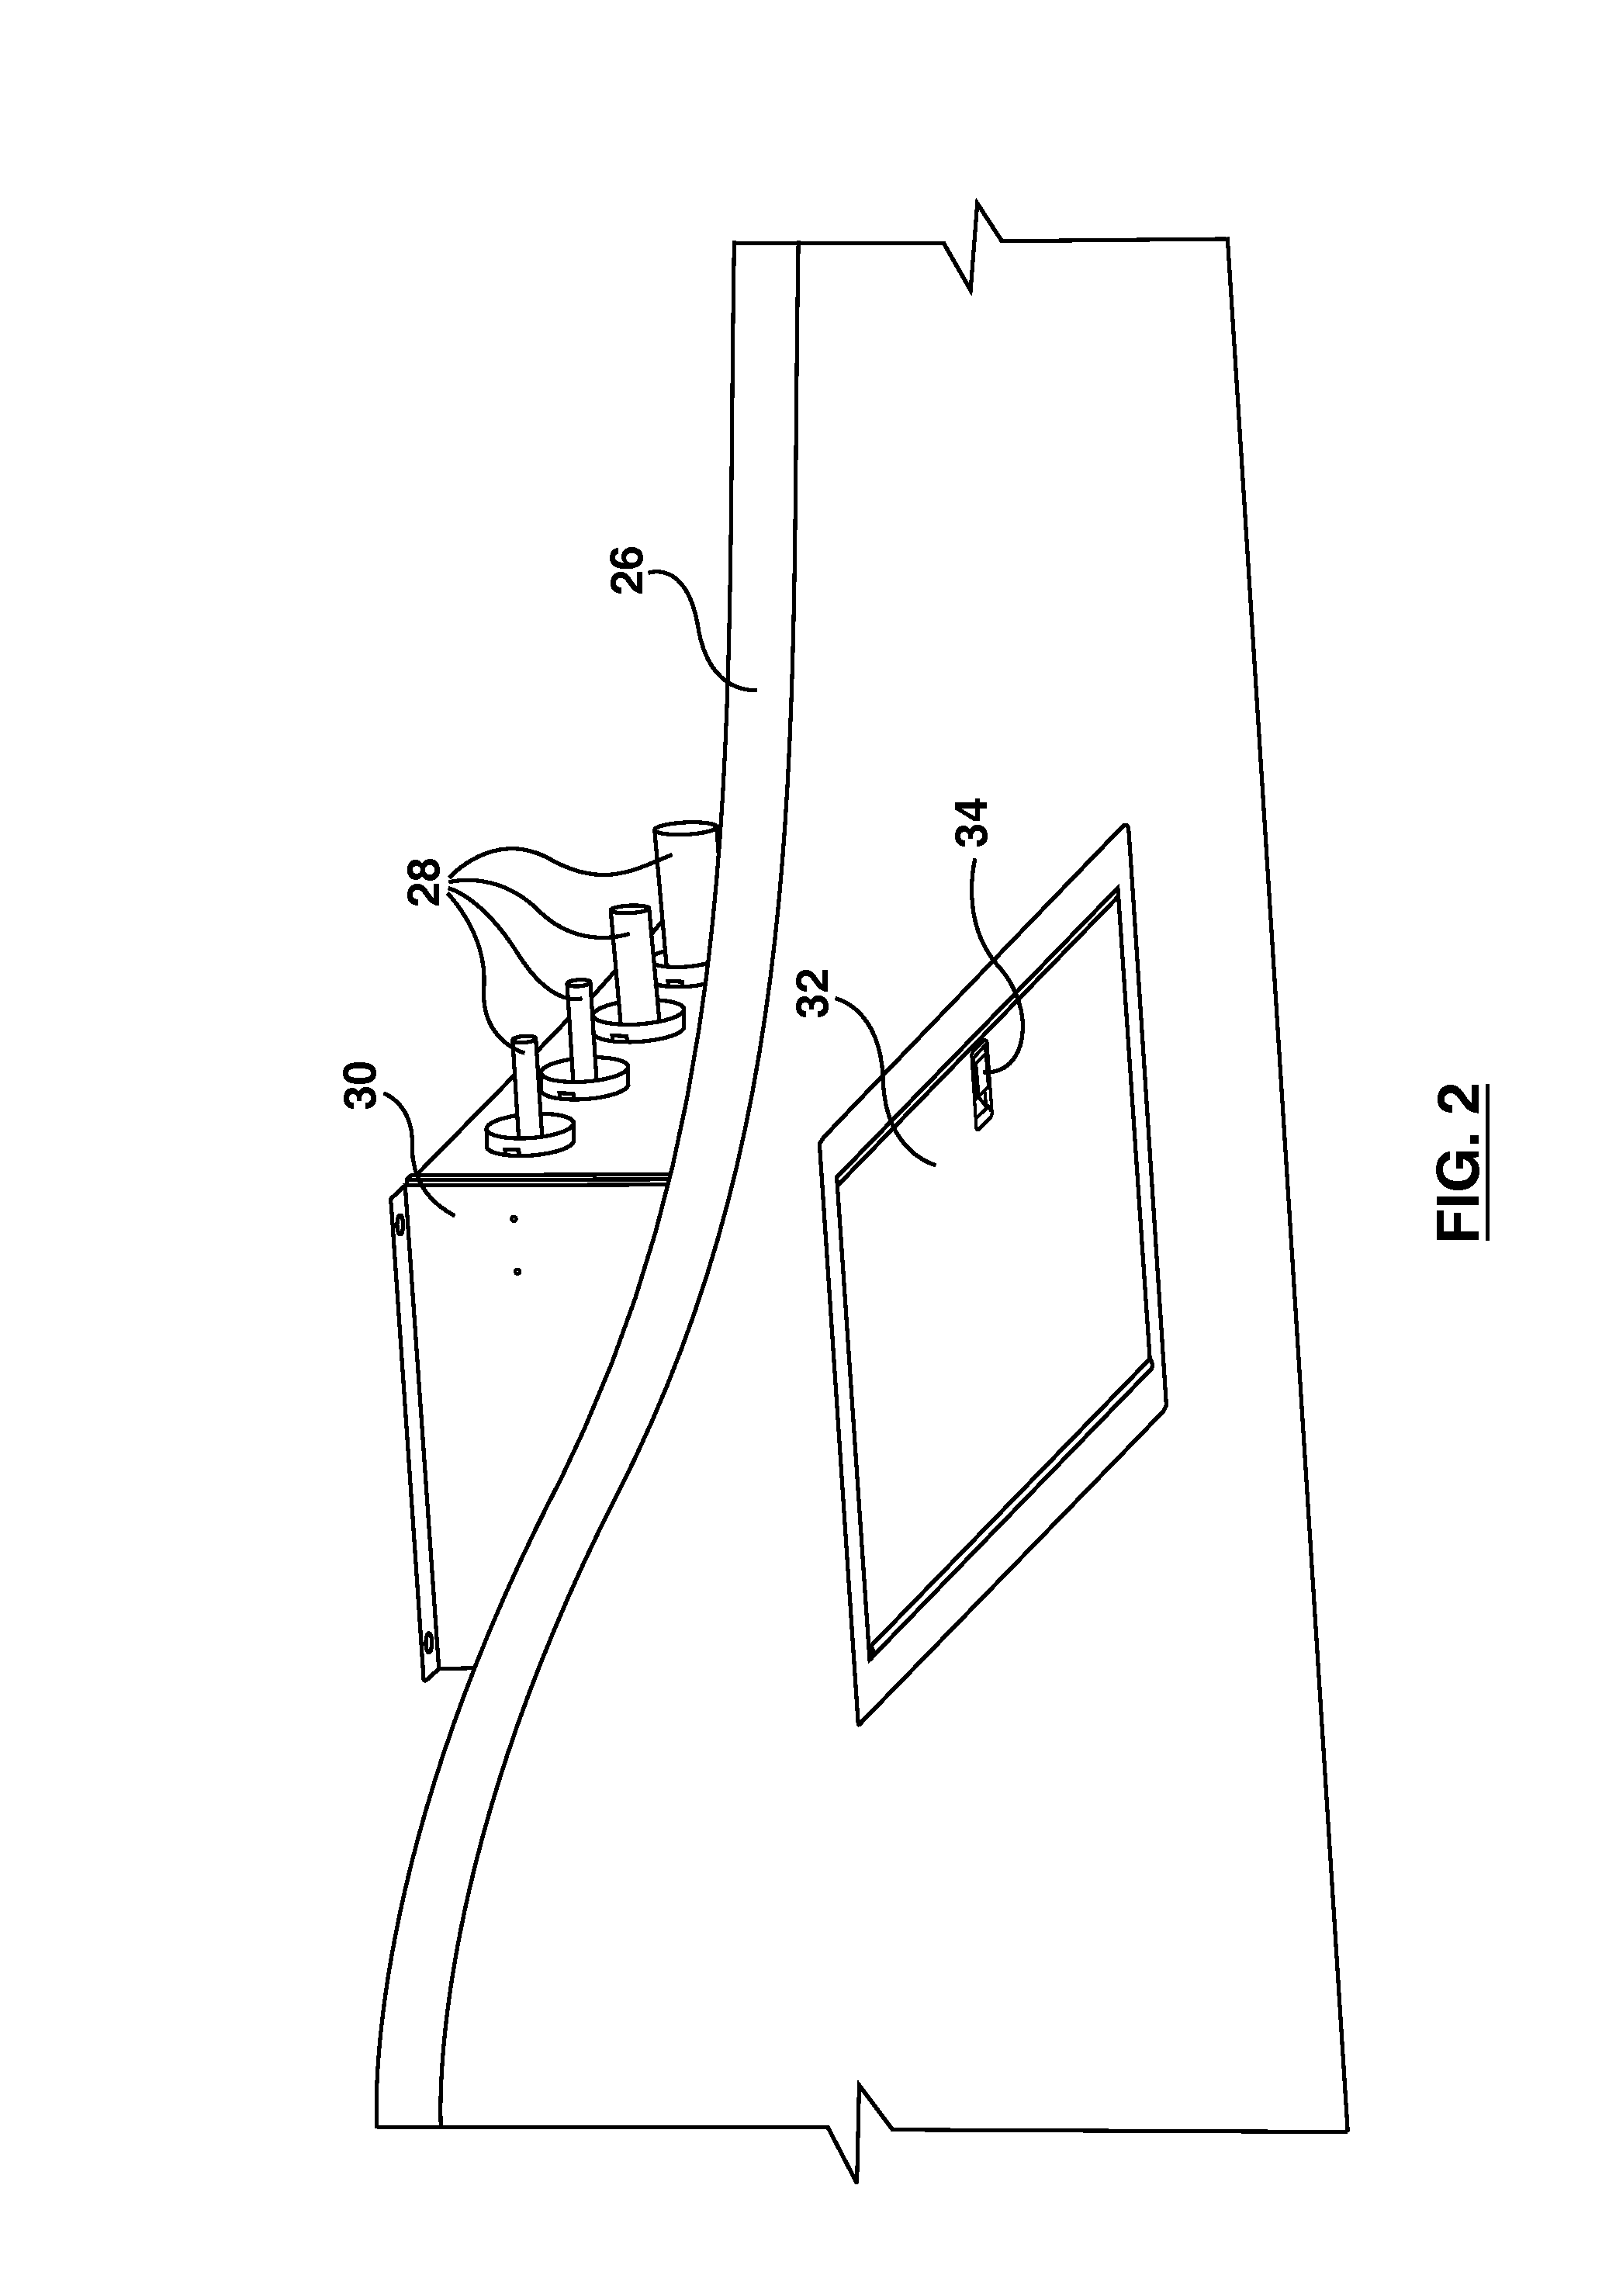 Methods and apparatus for controlling fluid flow in medical facilities